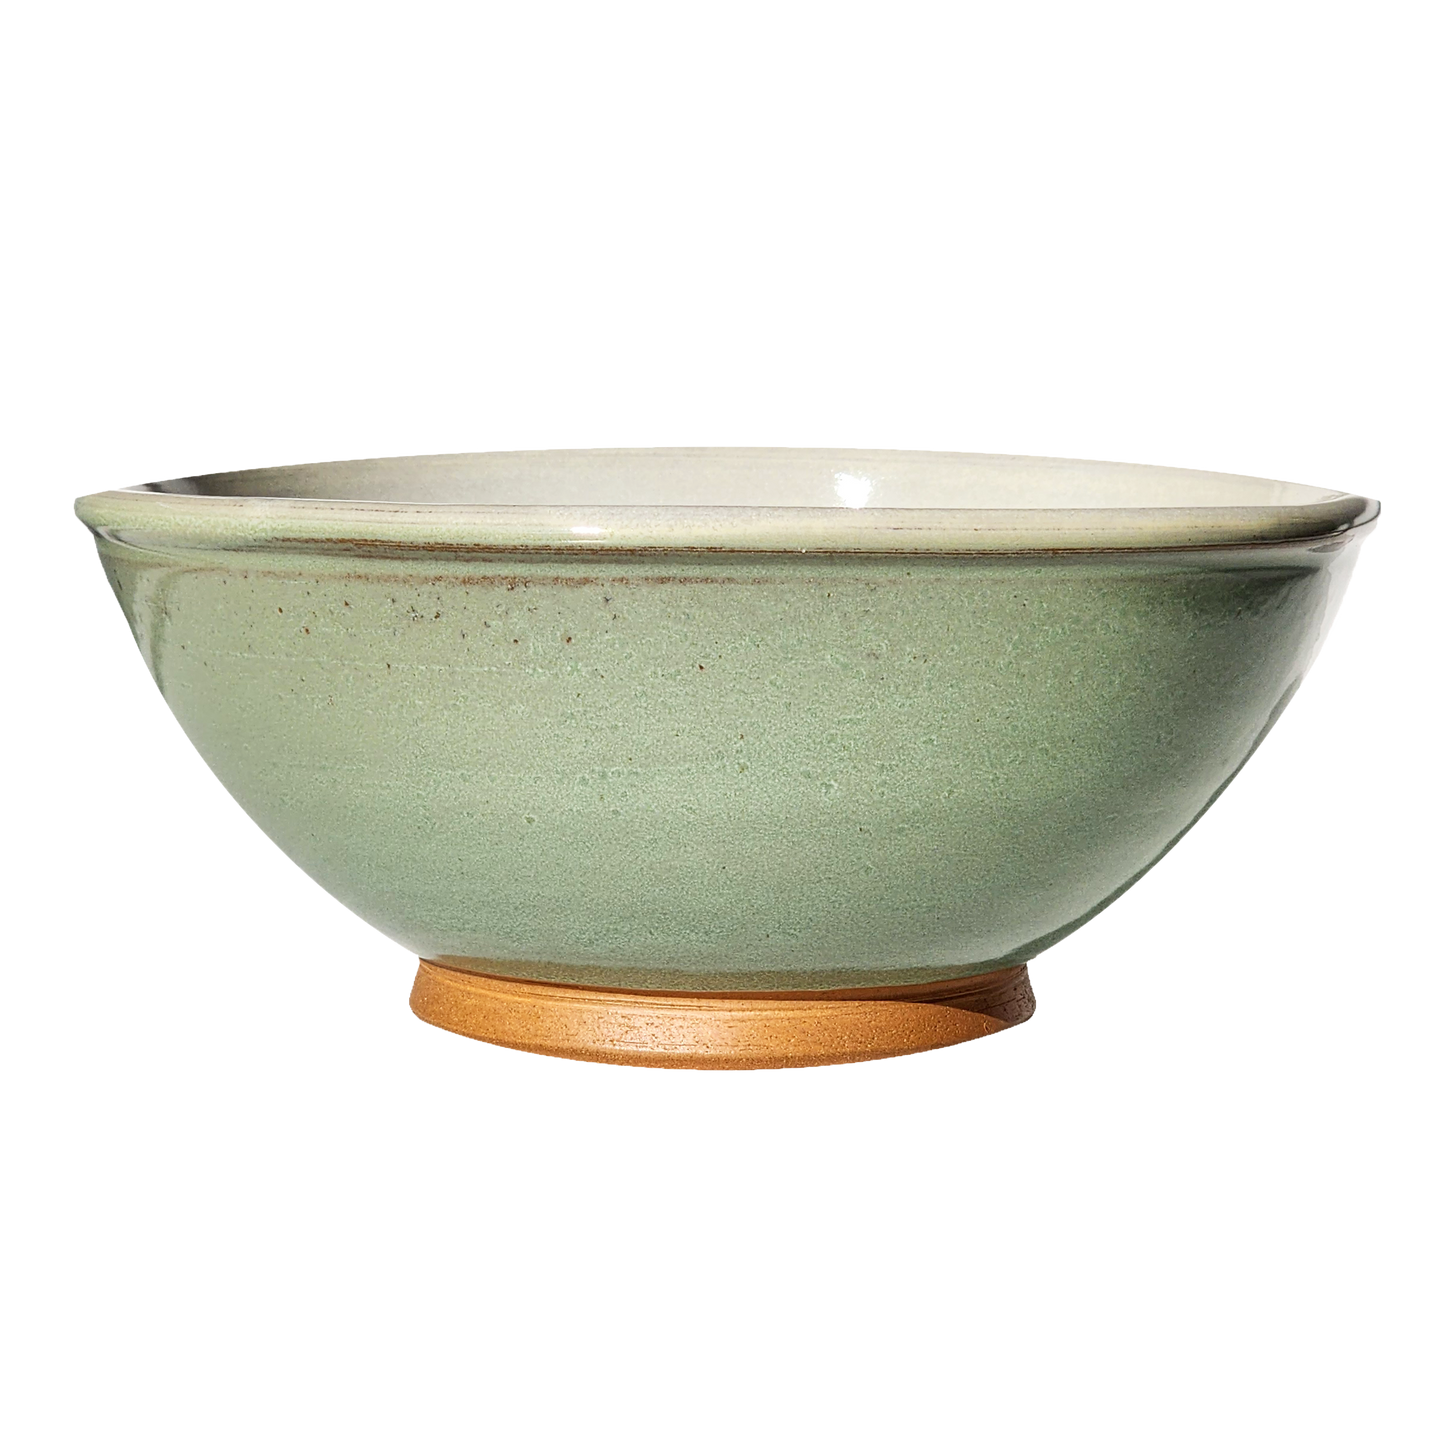 Image: A large mixing bowl in soft light green, providing ample room with a capacity of 12.5 cups. Infuse your kitchen with a sense of tranquility and freshness.